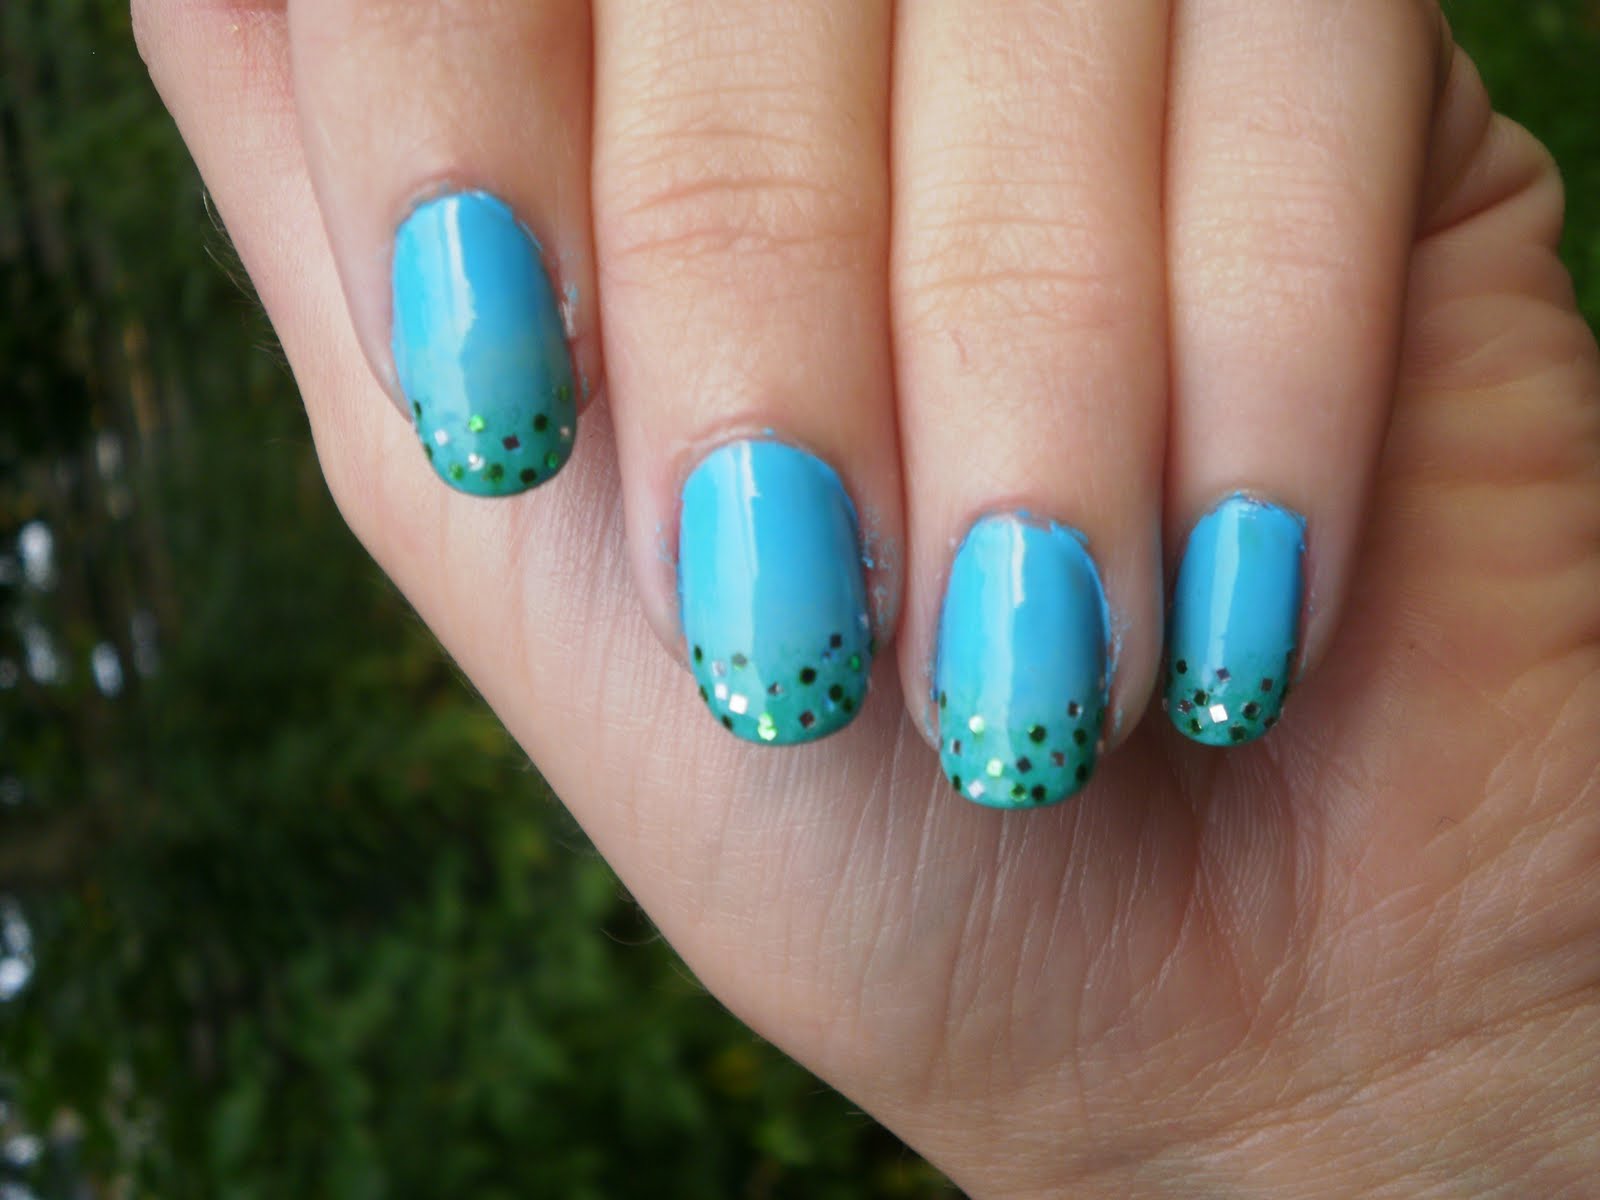 Mermaid Chrome Nail Designs for Short Nails - wide 8